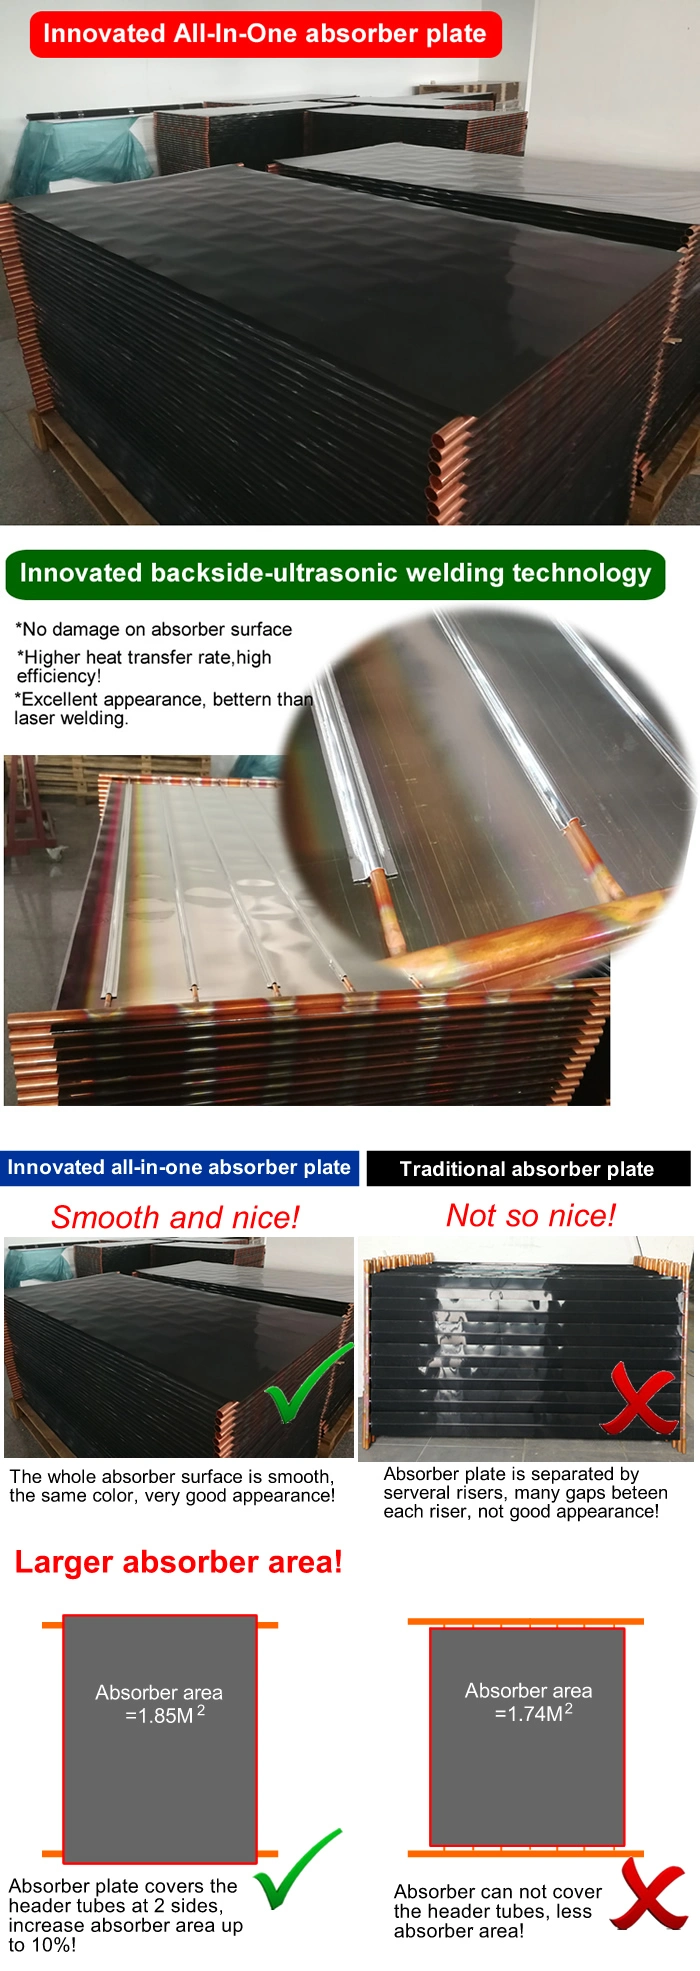 Flexible Flat Plate Solar Water Heater and Solar Energy Water Heater for House Applications